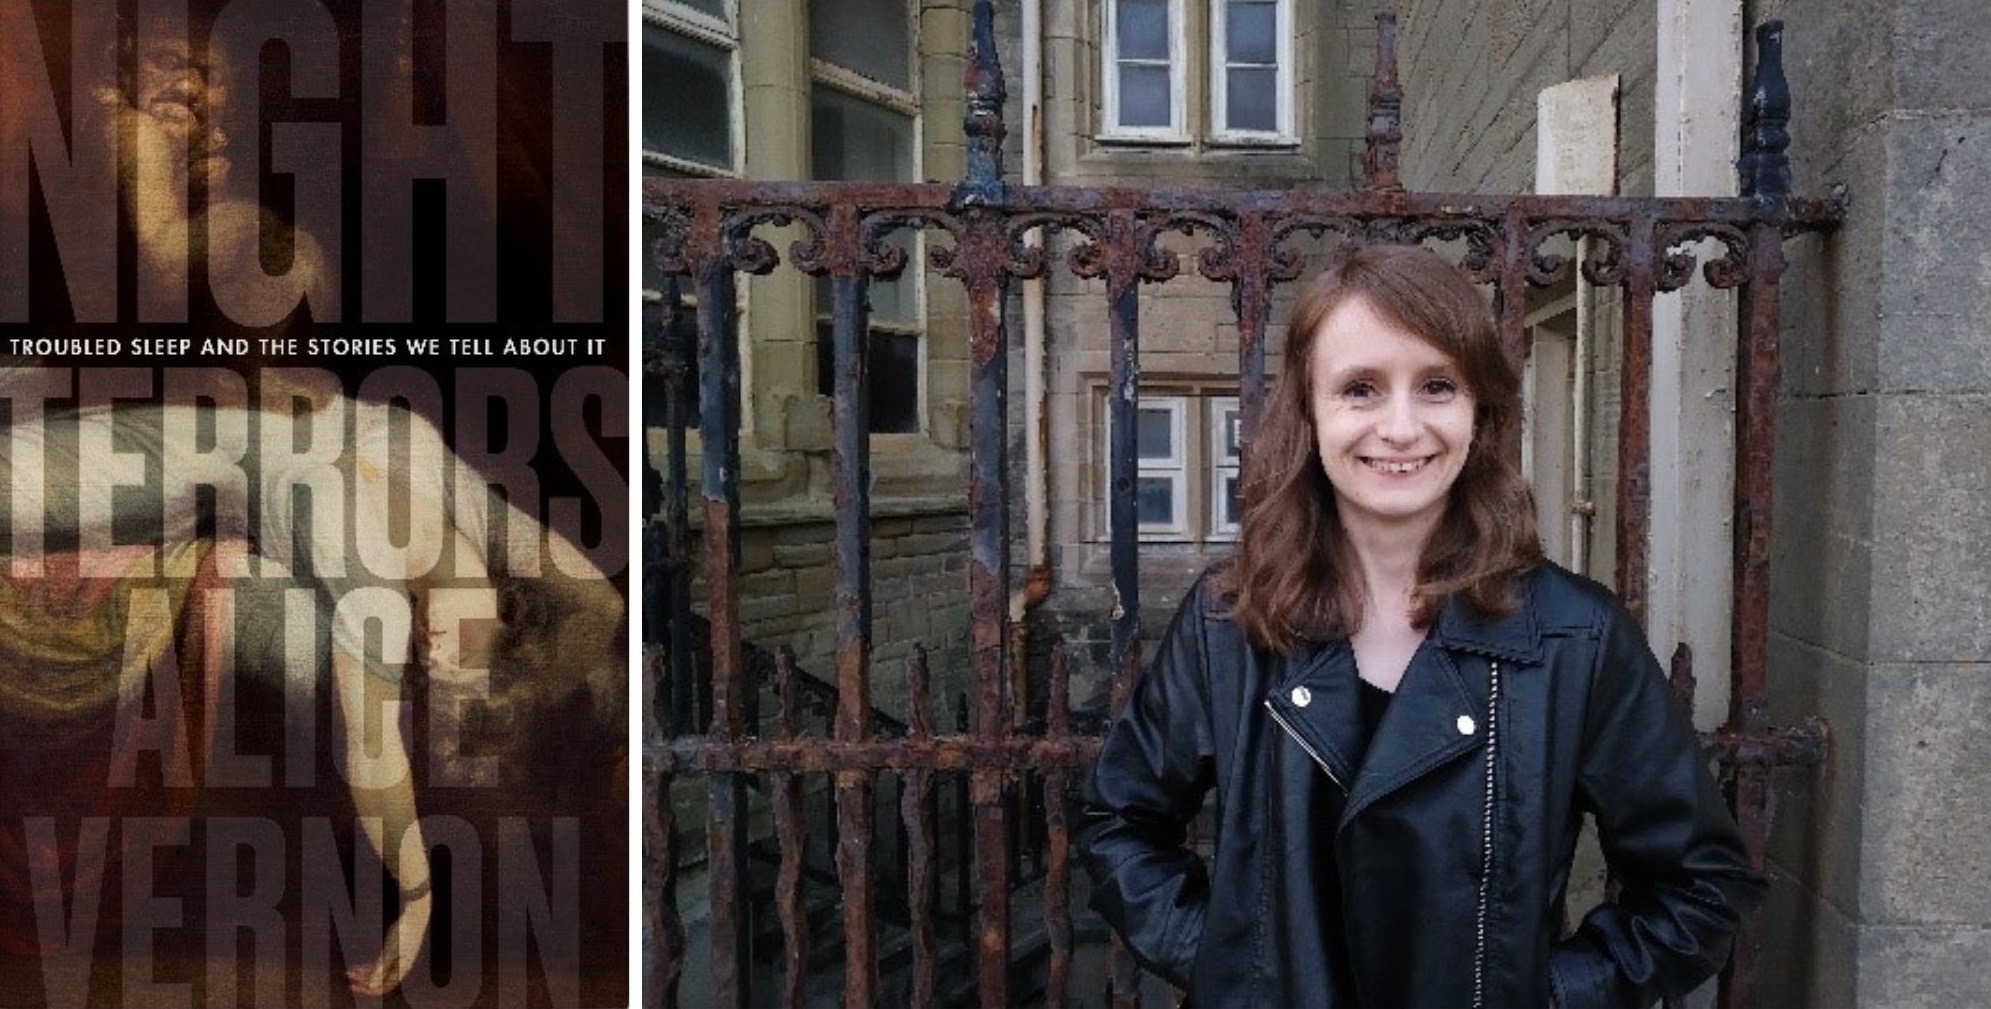 Dr Alice Vernon and her latest book, Night Terrors.